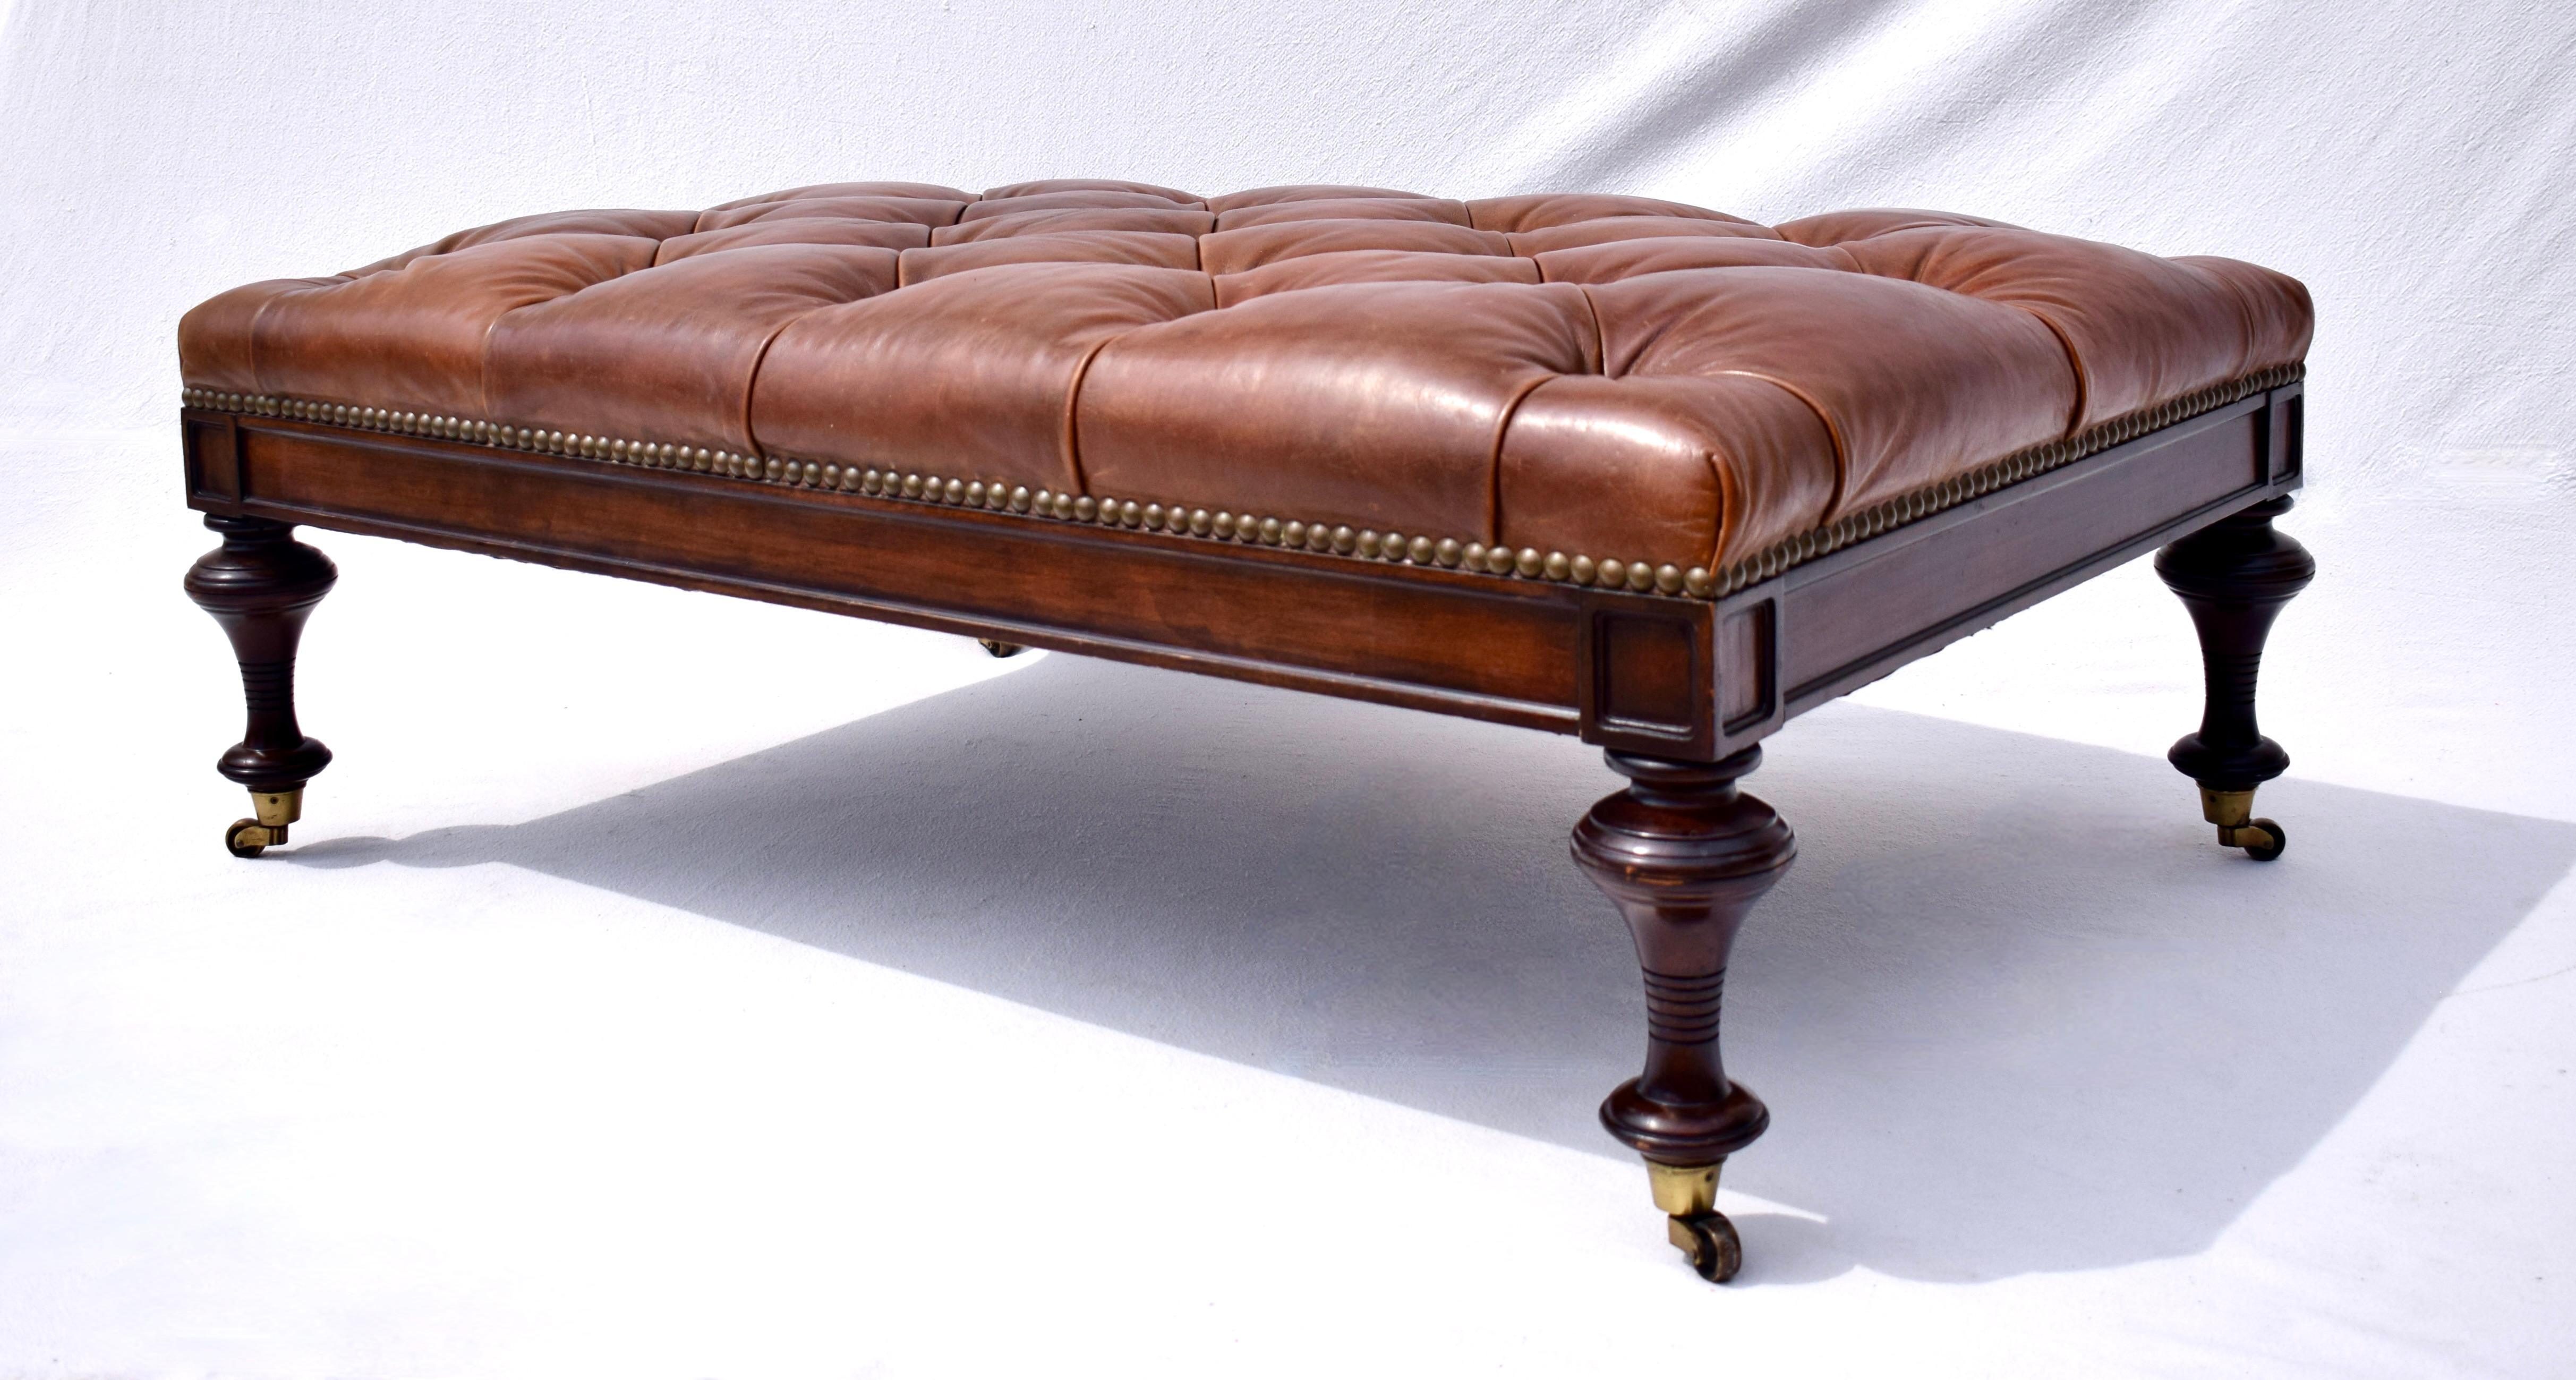 20th Century Chesterfield Leather Ottoman on Brass Casters by Drexel  For Sale